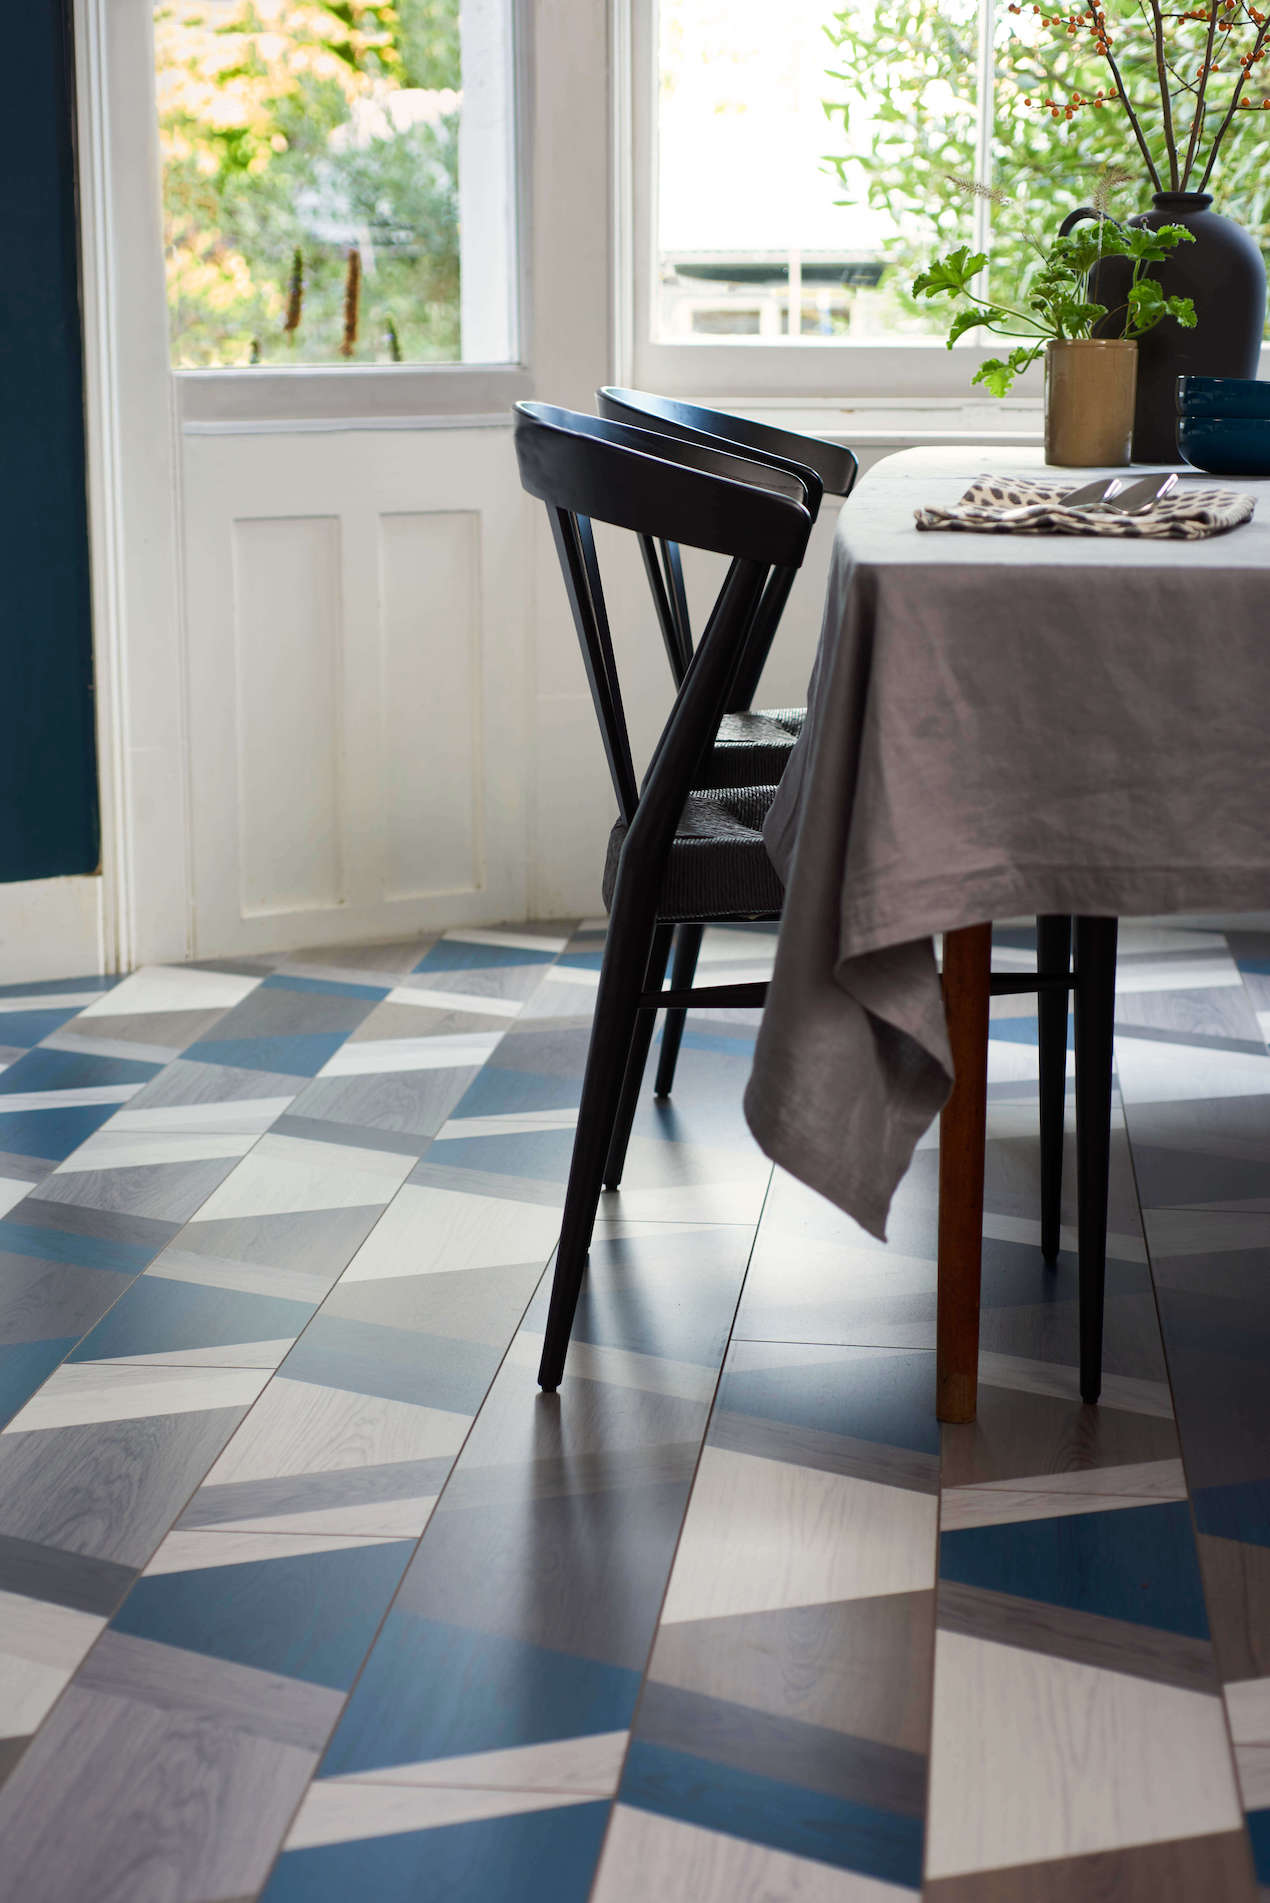 Hottest flooring trend this Spring is to take classic patterns and updated them with modern styling says Interior Stylist Maxine Brady at welovehomeblog.com 